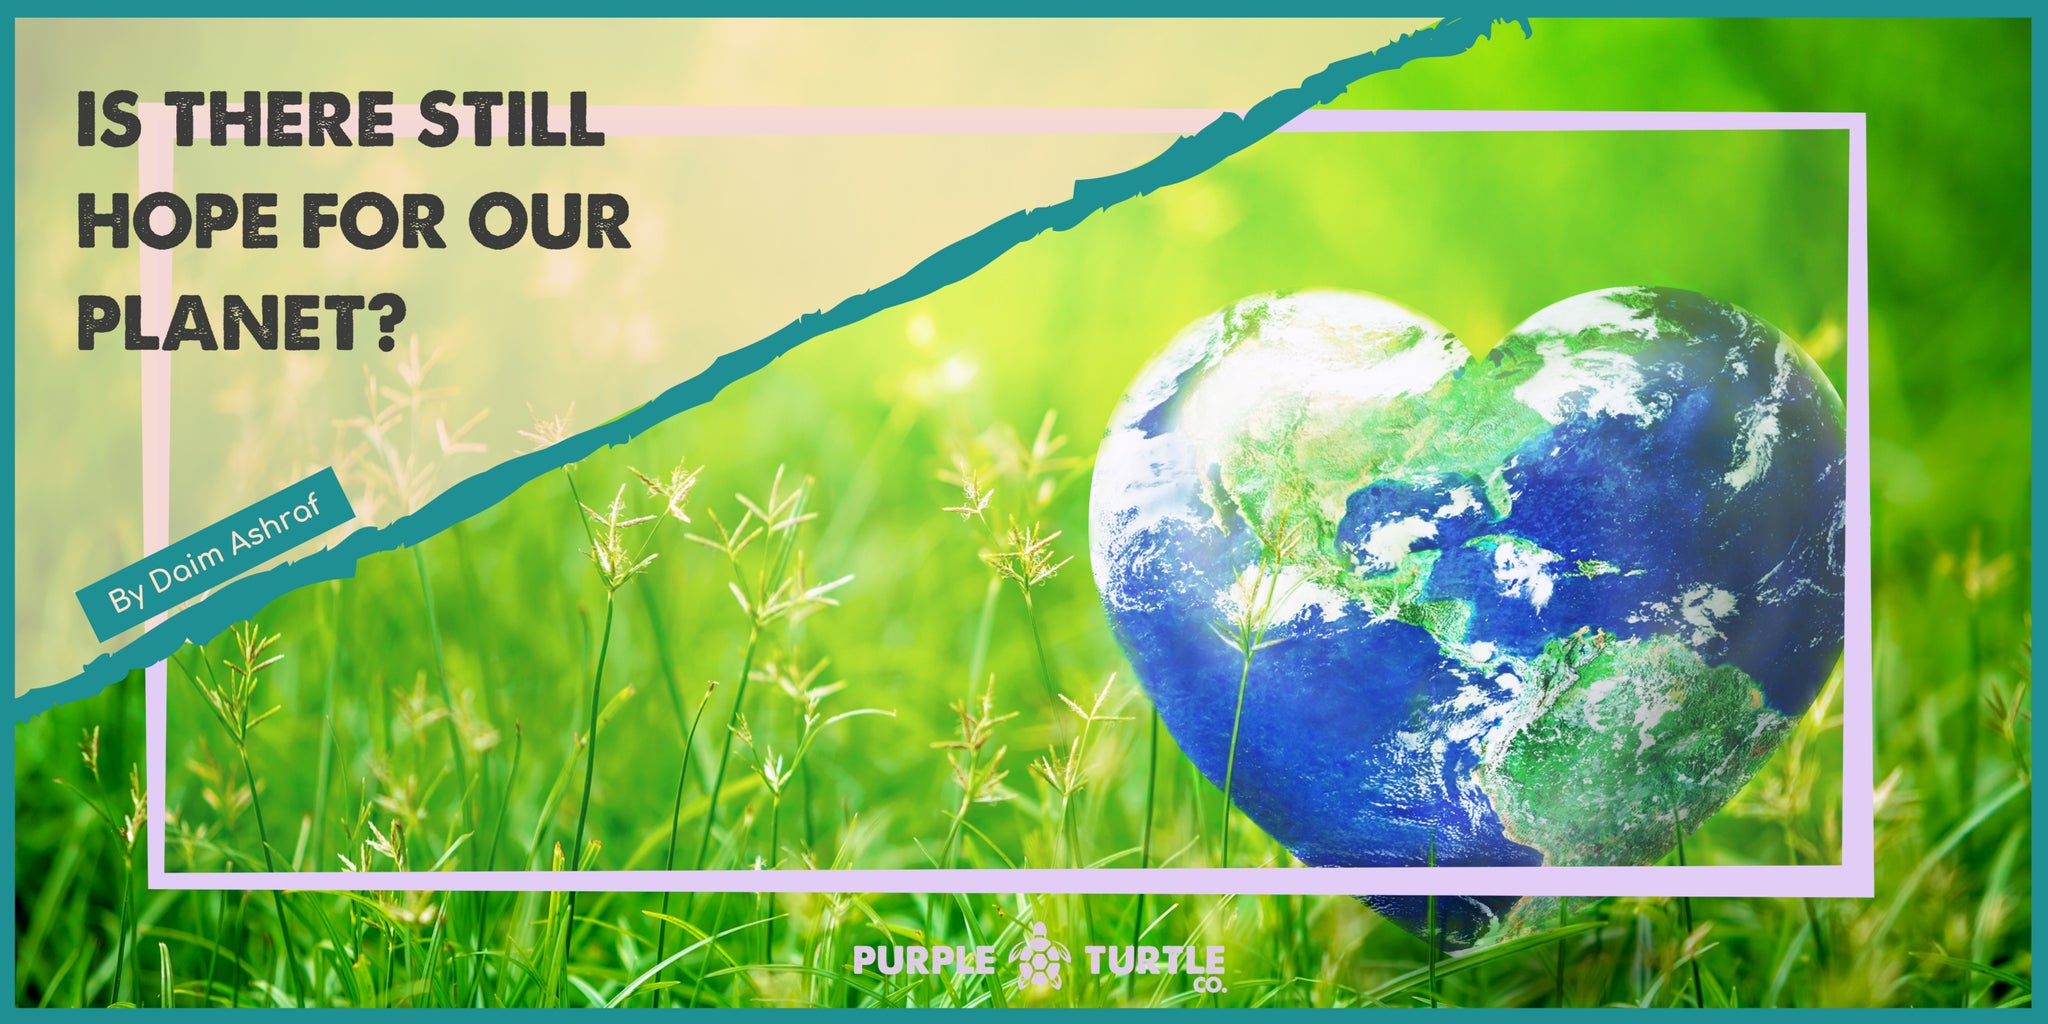 Heart shaped earth surrounded by green grass and flowers. This is framed by the Purple Turtle logo and blog author and title.